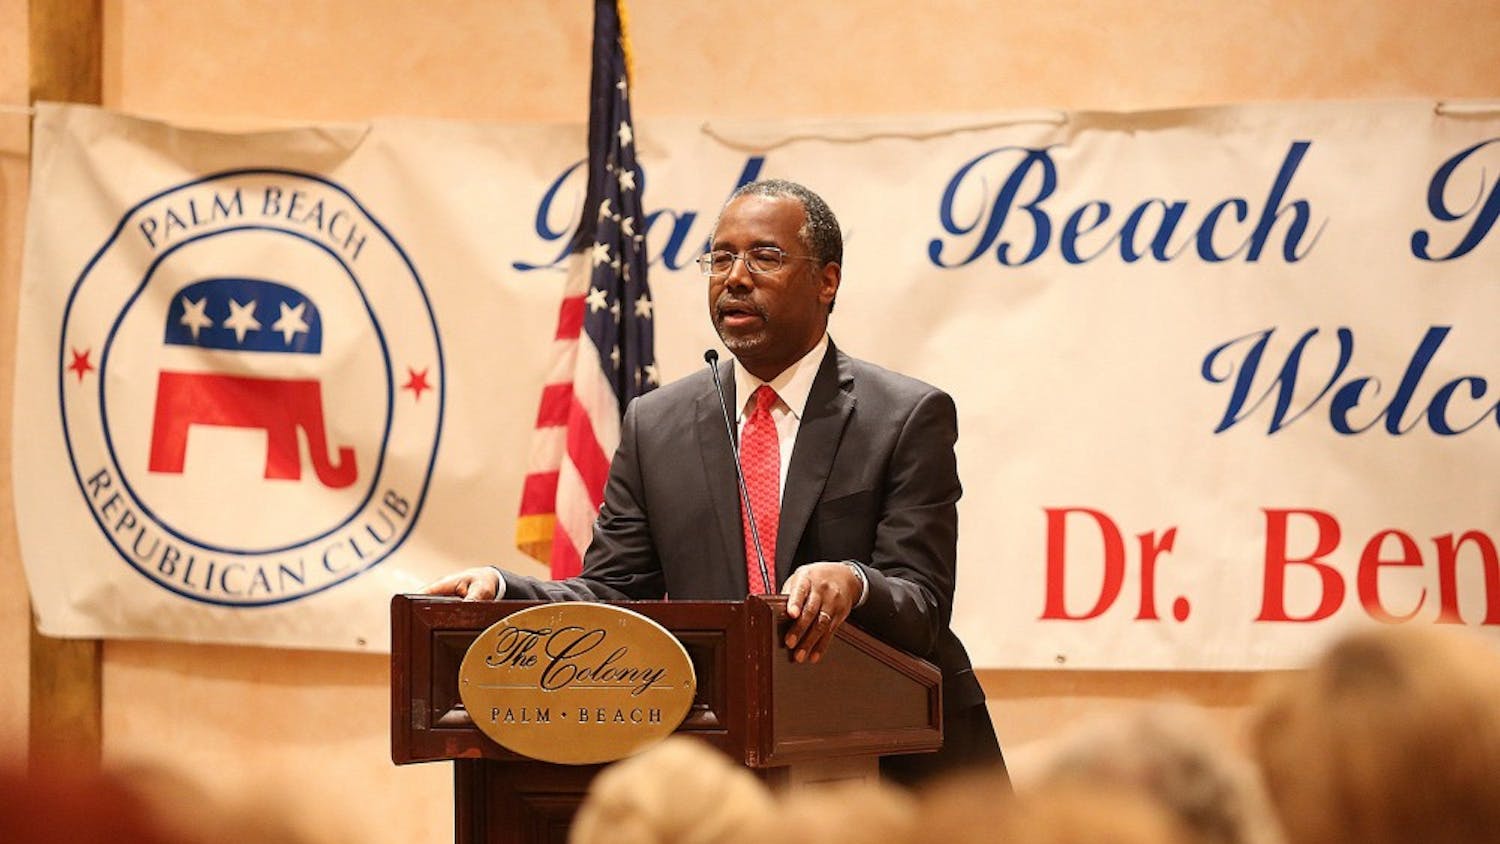 Ben Carson, an outspoken conservative and potential presidential candidate, speaks to the Palm Beach Republican Club in Palm Beach, Fla., on Monday, Feb. 16, 2015. (Carline Jean/Sun Sentinel/TNS)